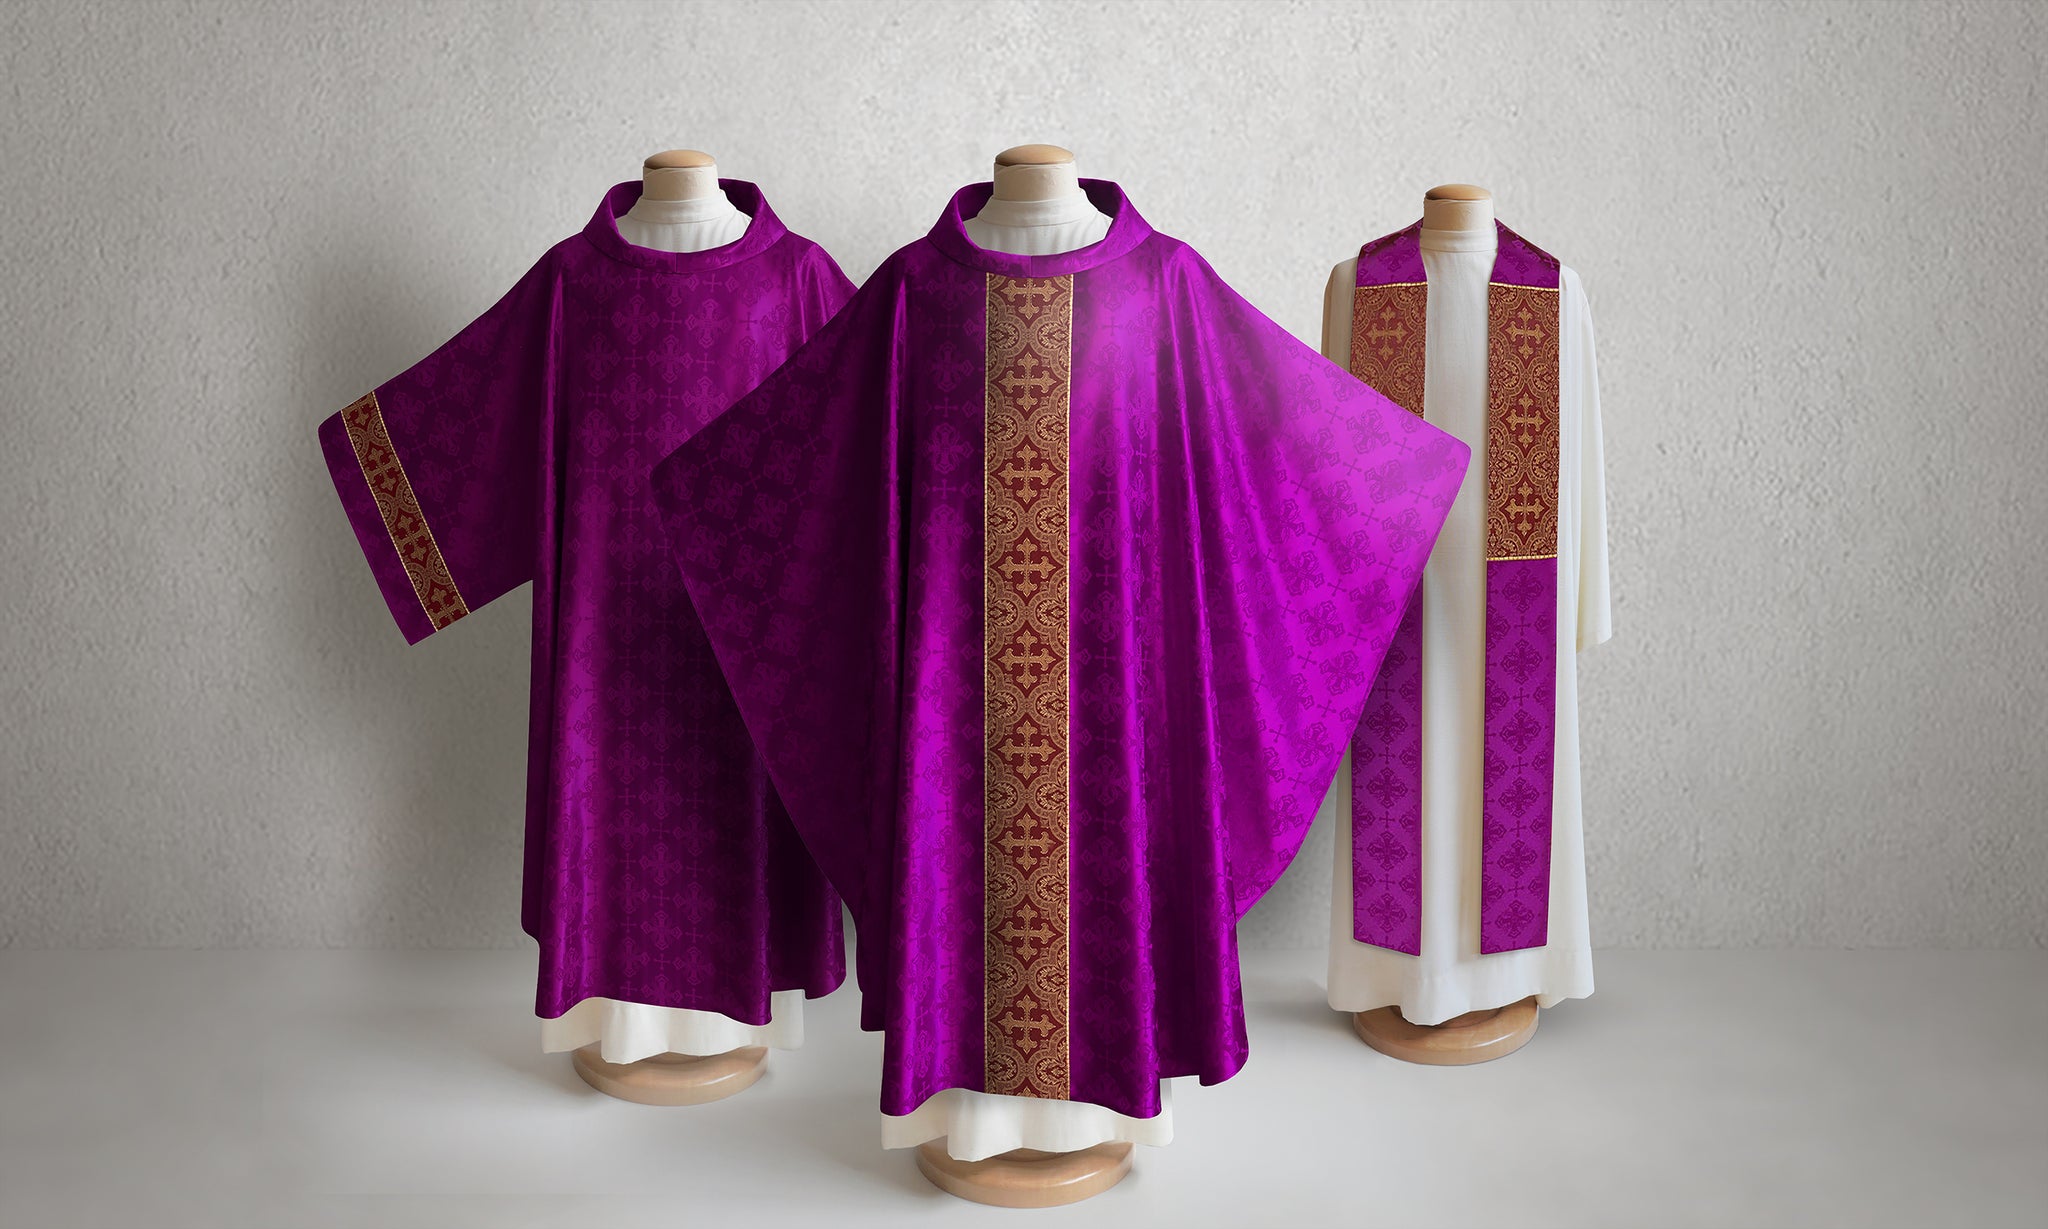 Classic Francis <br> Chasuble <br> in Lucia Purple